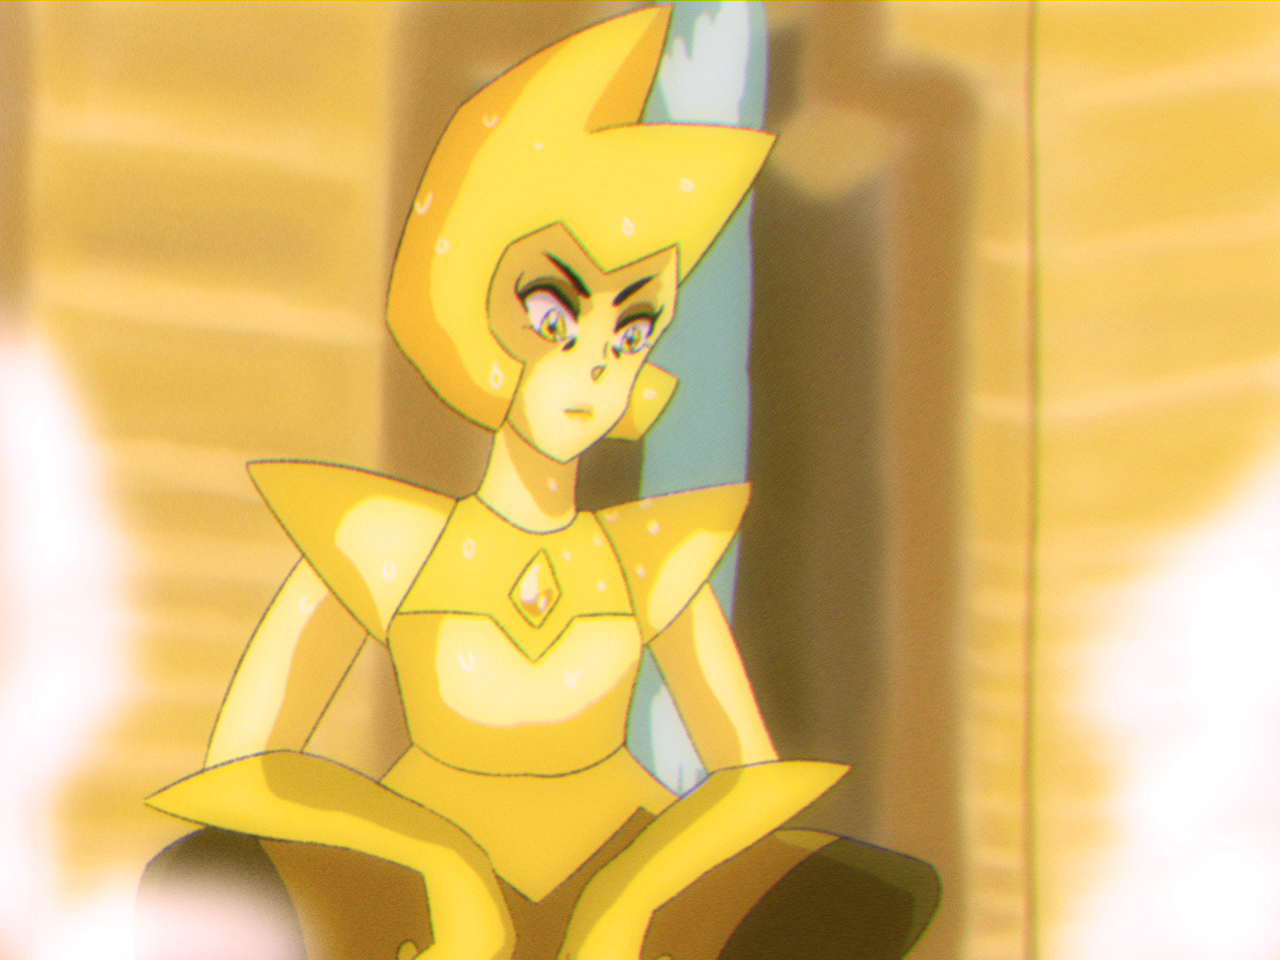 The full Diamond Authority done in my retro style